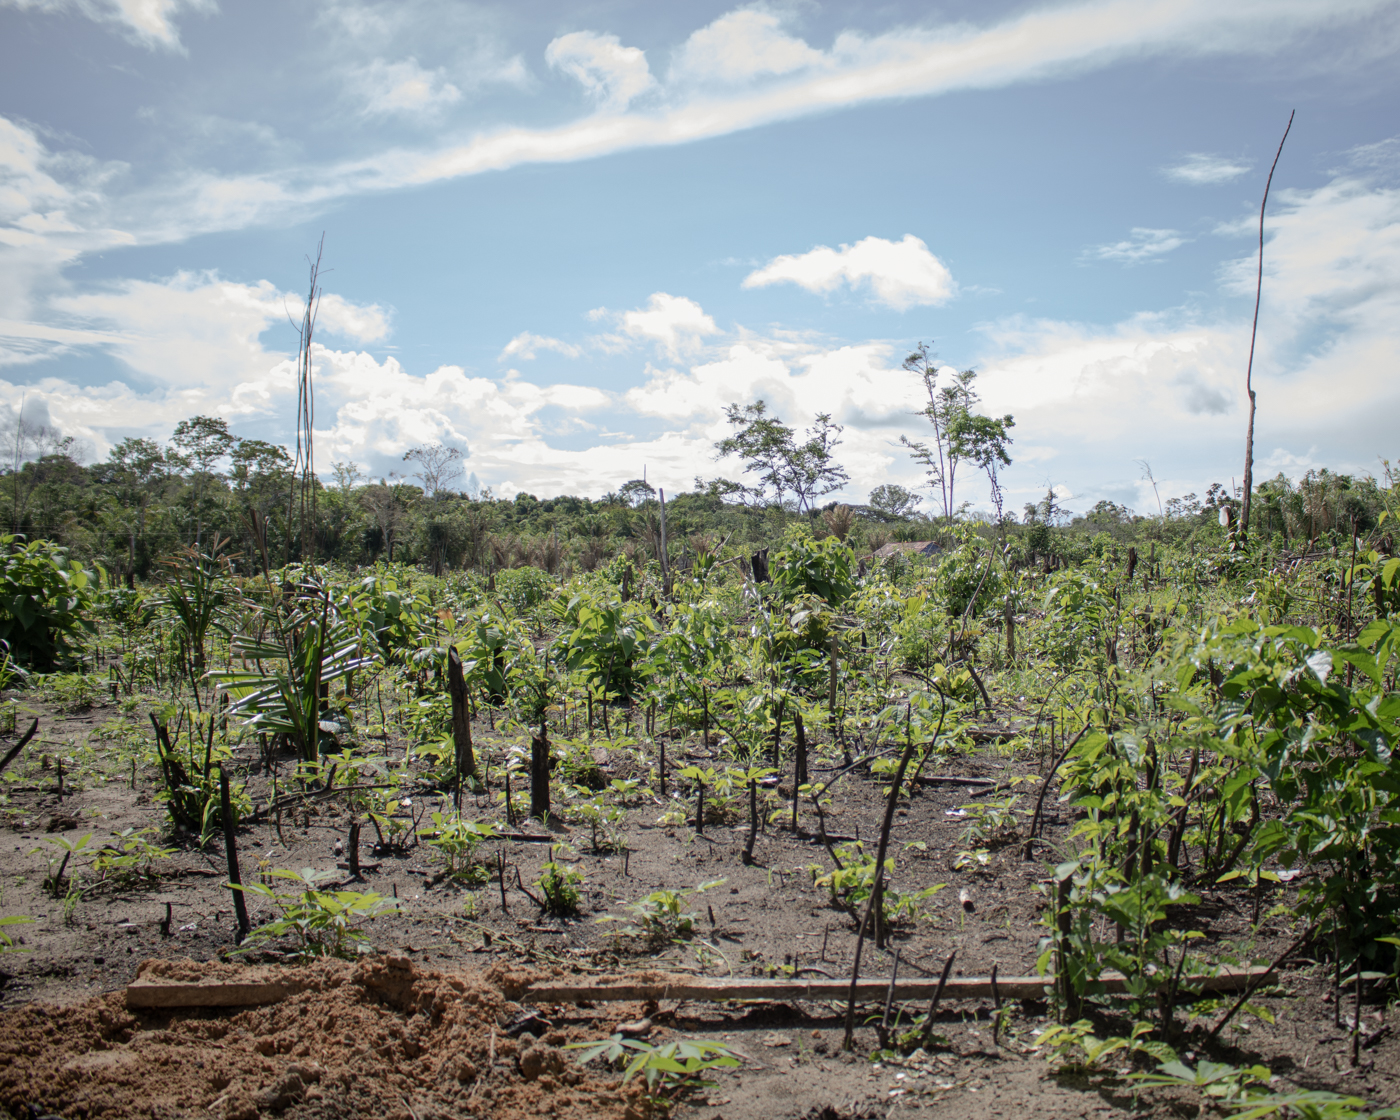 Cassava crops in Novo Paraíso, located in the Manoá-Pium Indigenous Territory, in the Brazilian state of Roraima. The local community relies heavily on the production and trade of cassava flour.